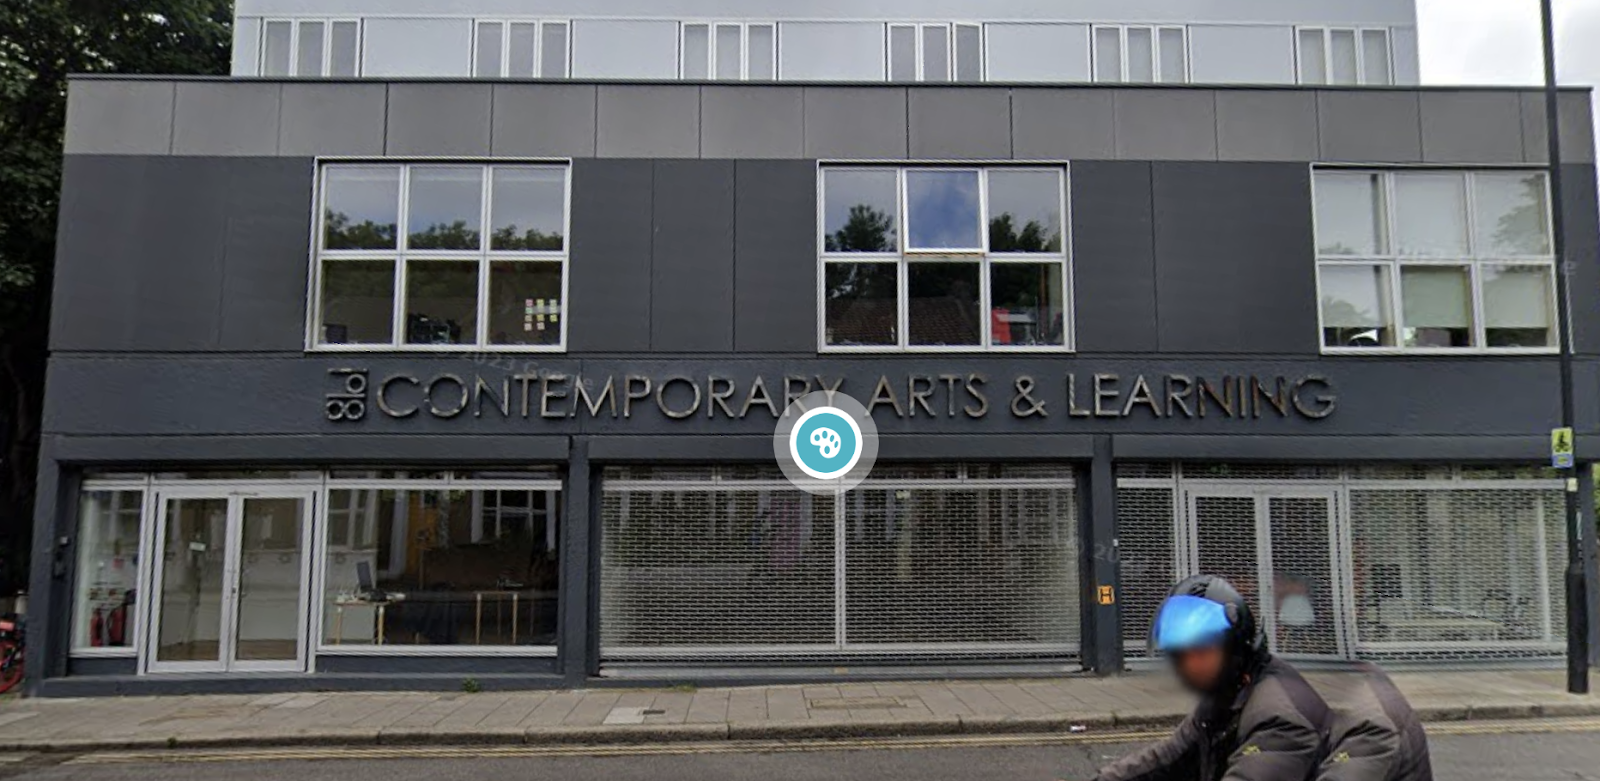 Google maps photo of the facade of 198 contemporary arts and learning gallery in herne hill